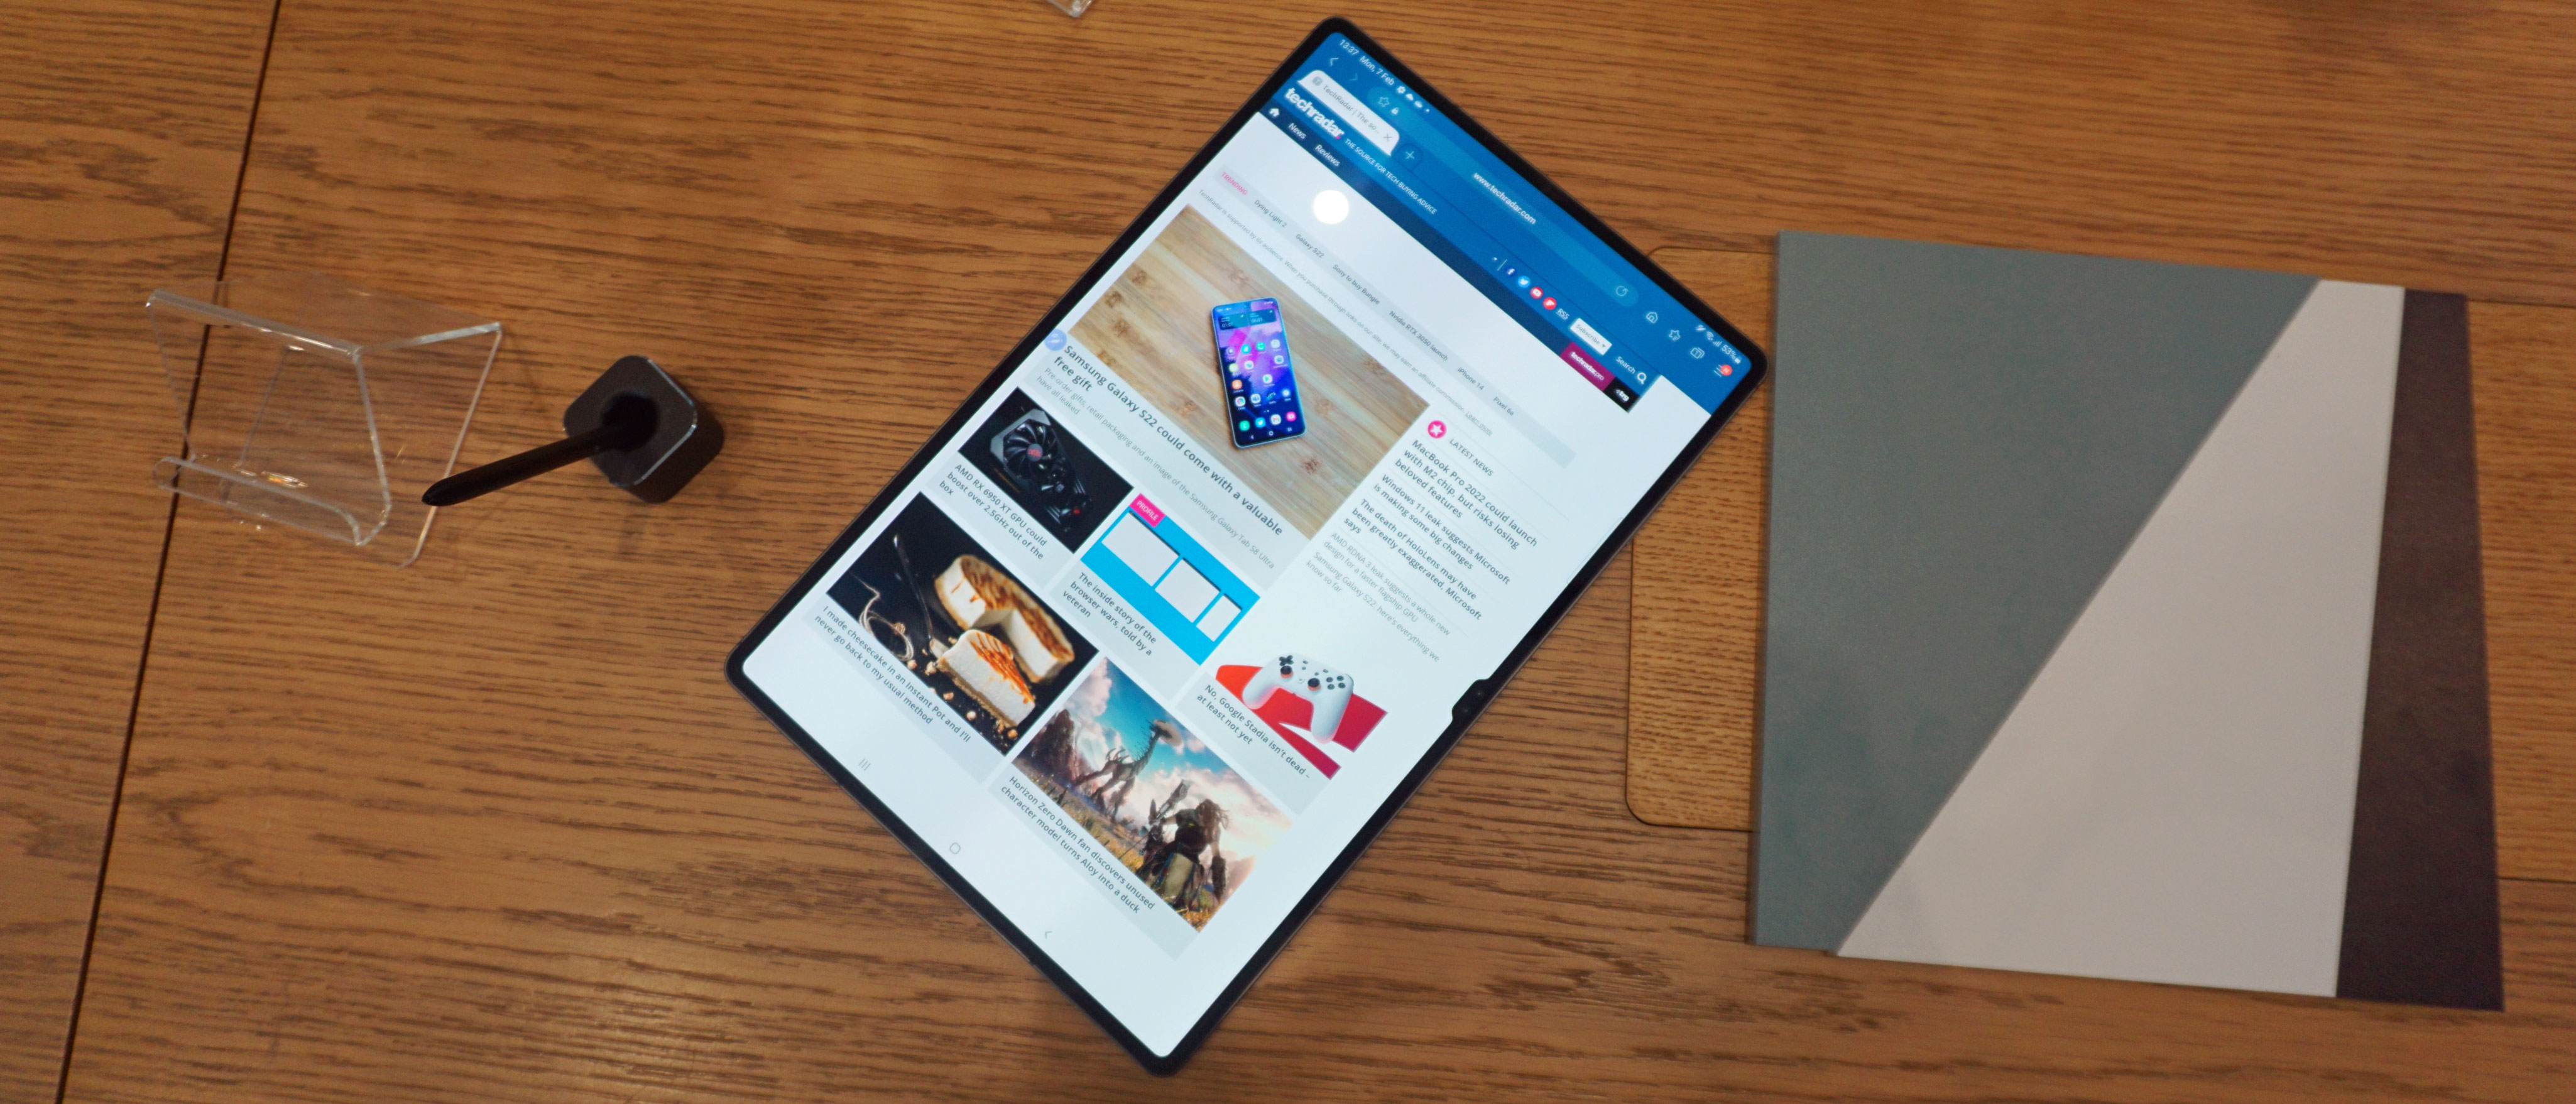 Samsung Galaxy Tab S8 Ultra: a gigantic Android tablet that'll prove  divisive